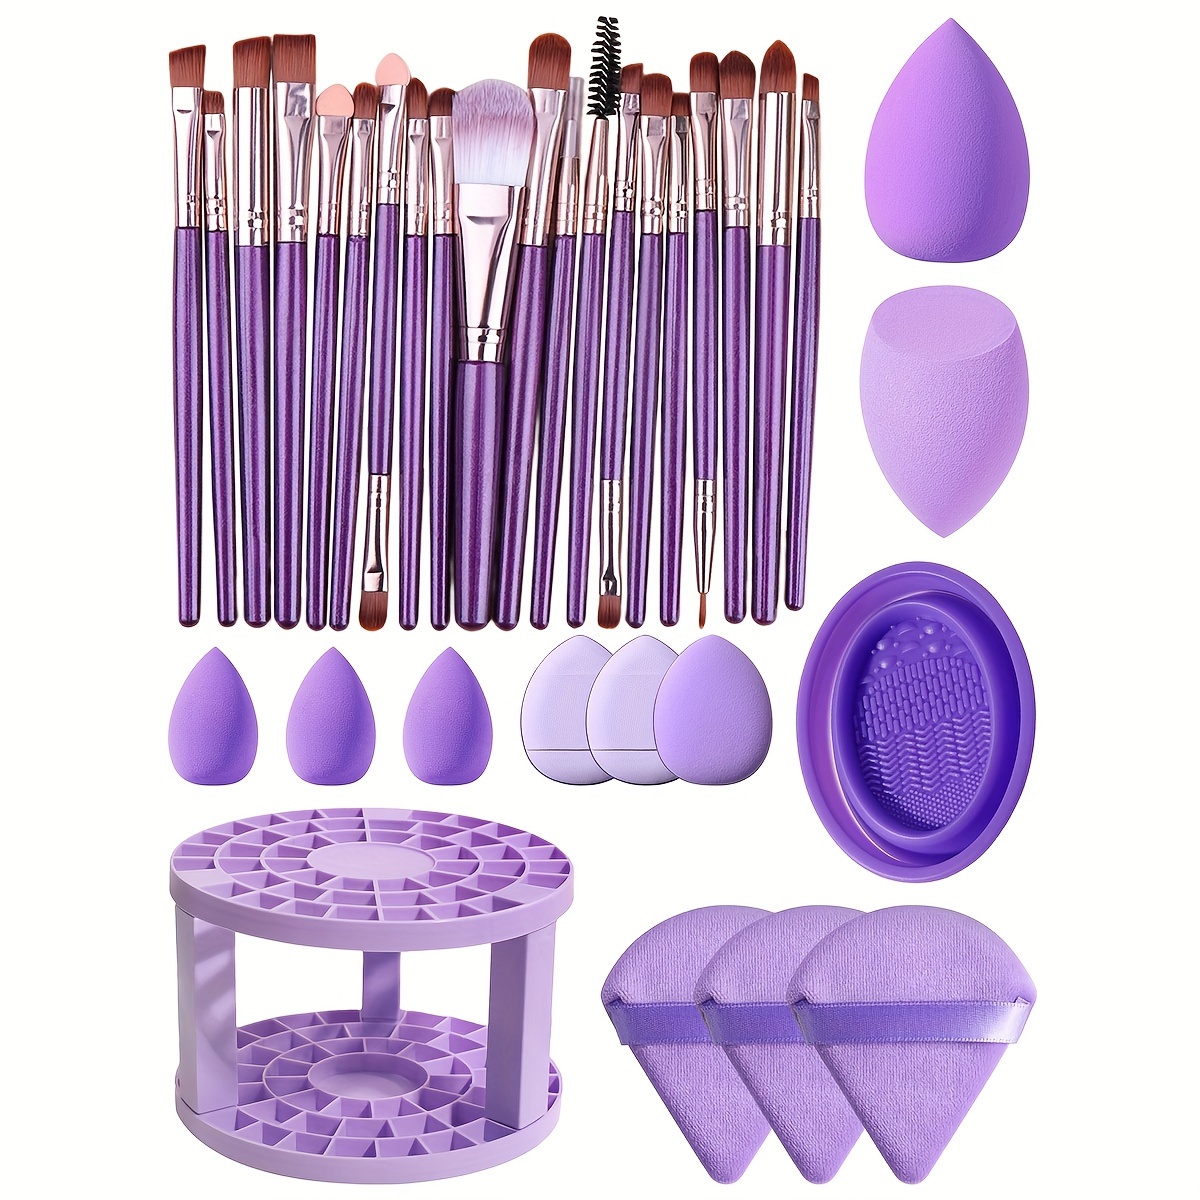 

All-in-one Makeup Set: Accessories For Application. Brush Holder, Powder Puffs, Sponges And Beauty Blenders, Makeup Brush Set, Cleaning Tools - Gift Set Mother's Day Gift